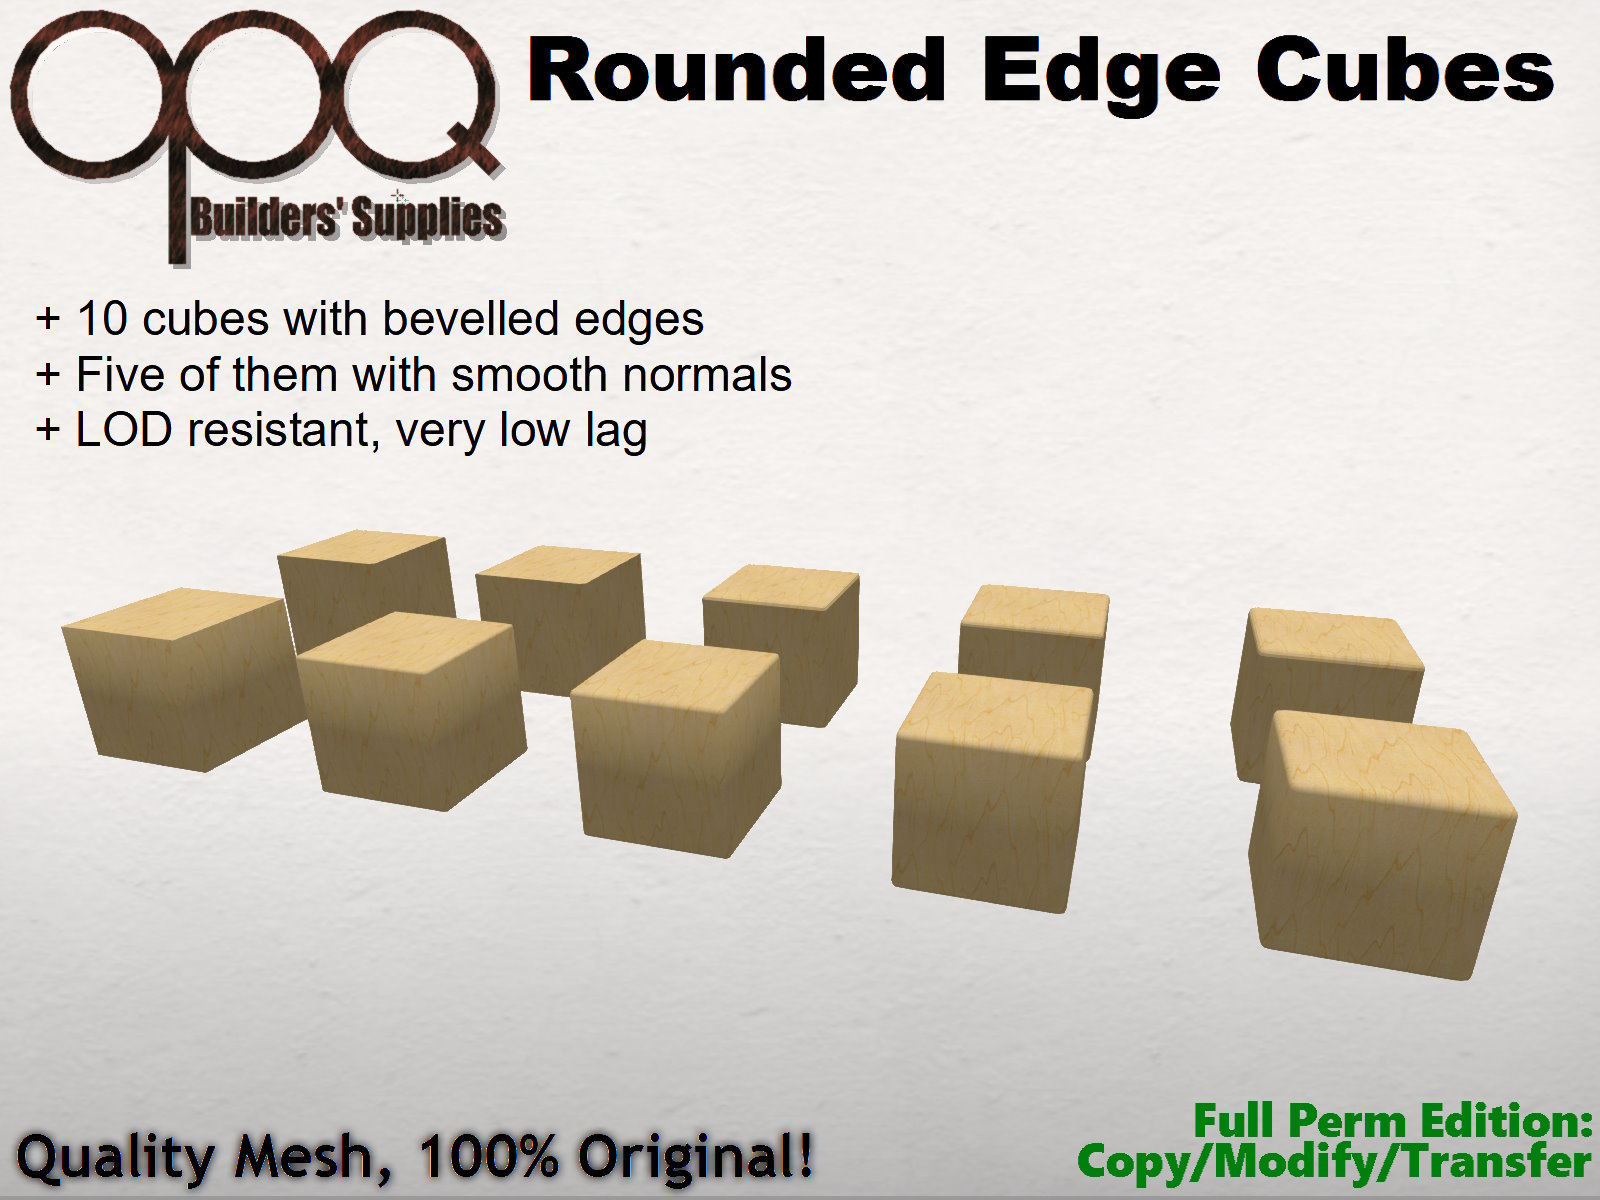 OPQ Rounded Edge Cubes poster.jpg